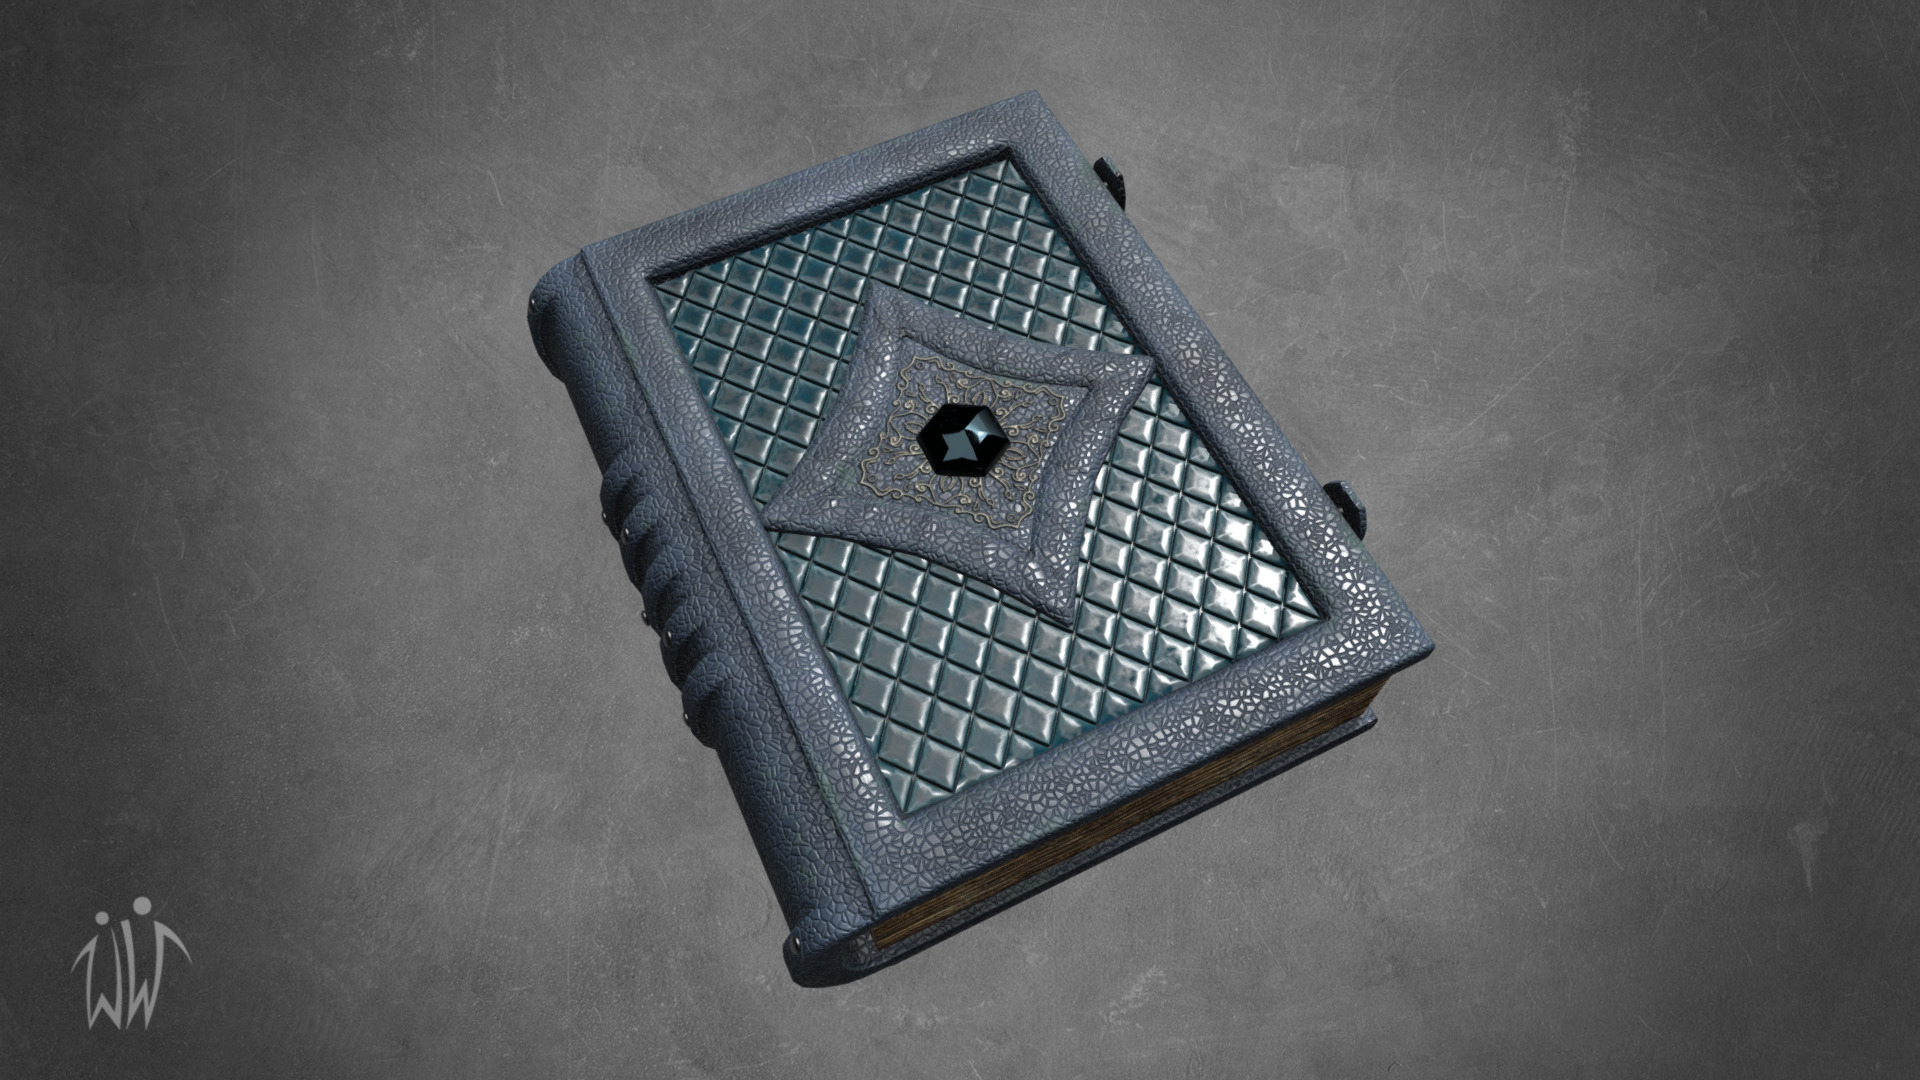 3D model Old spell book - This is a 3D model of the Old spell book. The 3D model is about a black rectangular object with a hole in it.